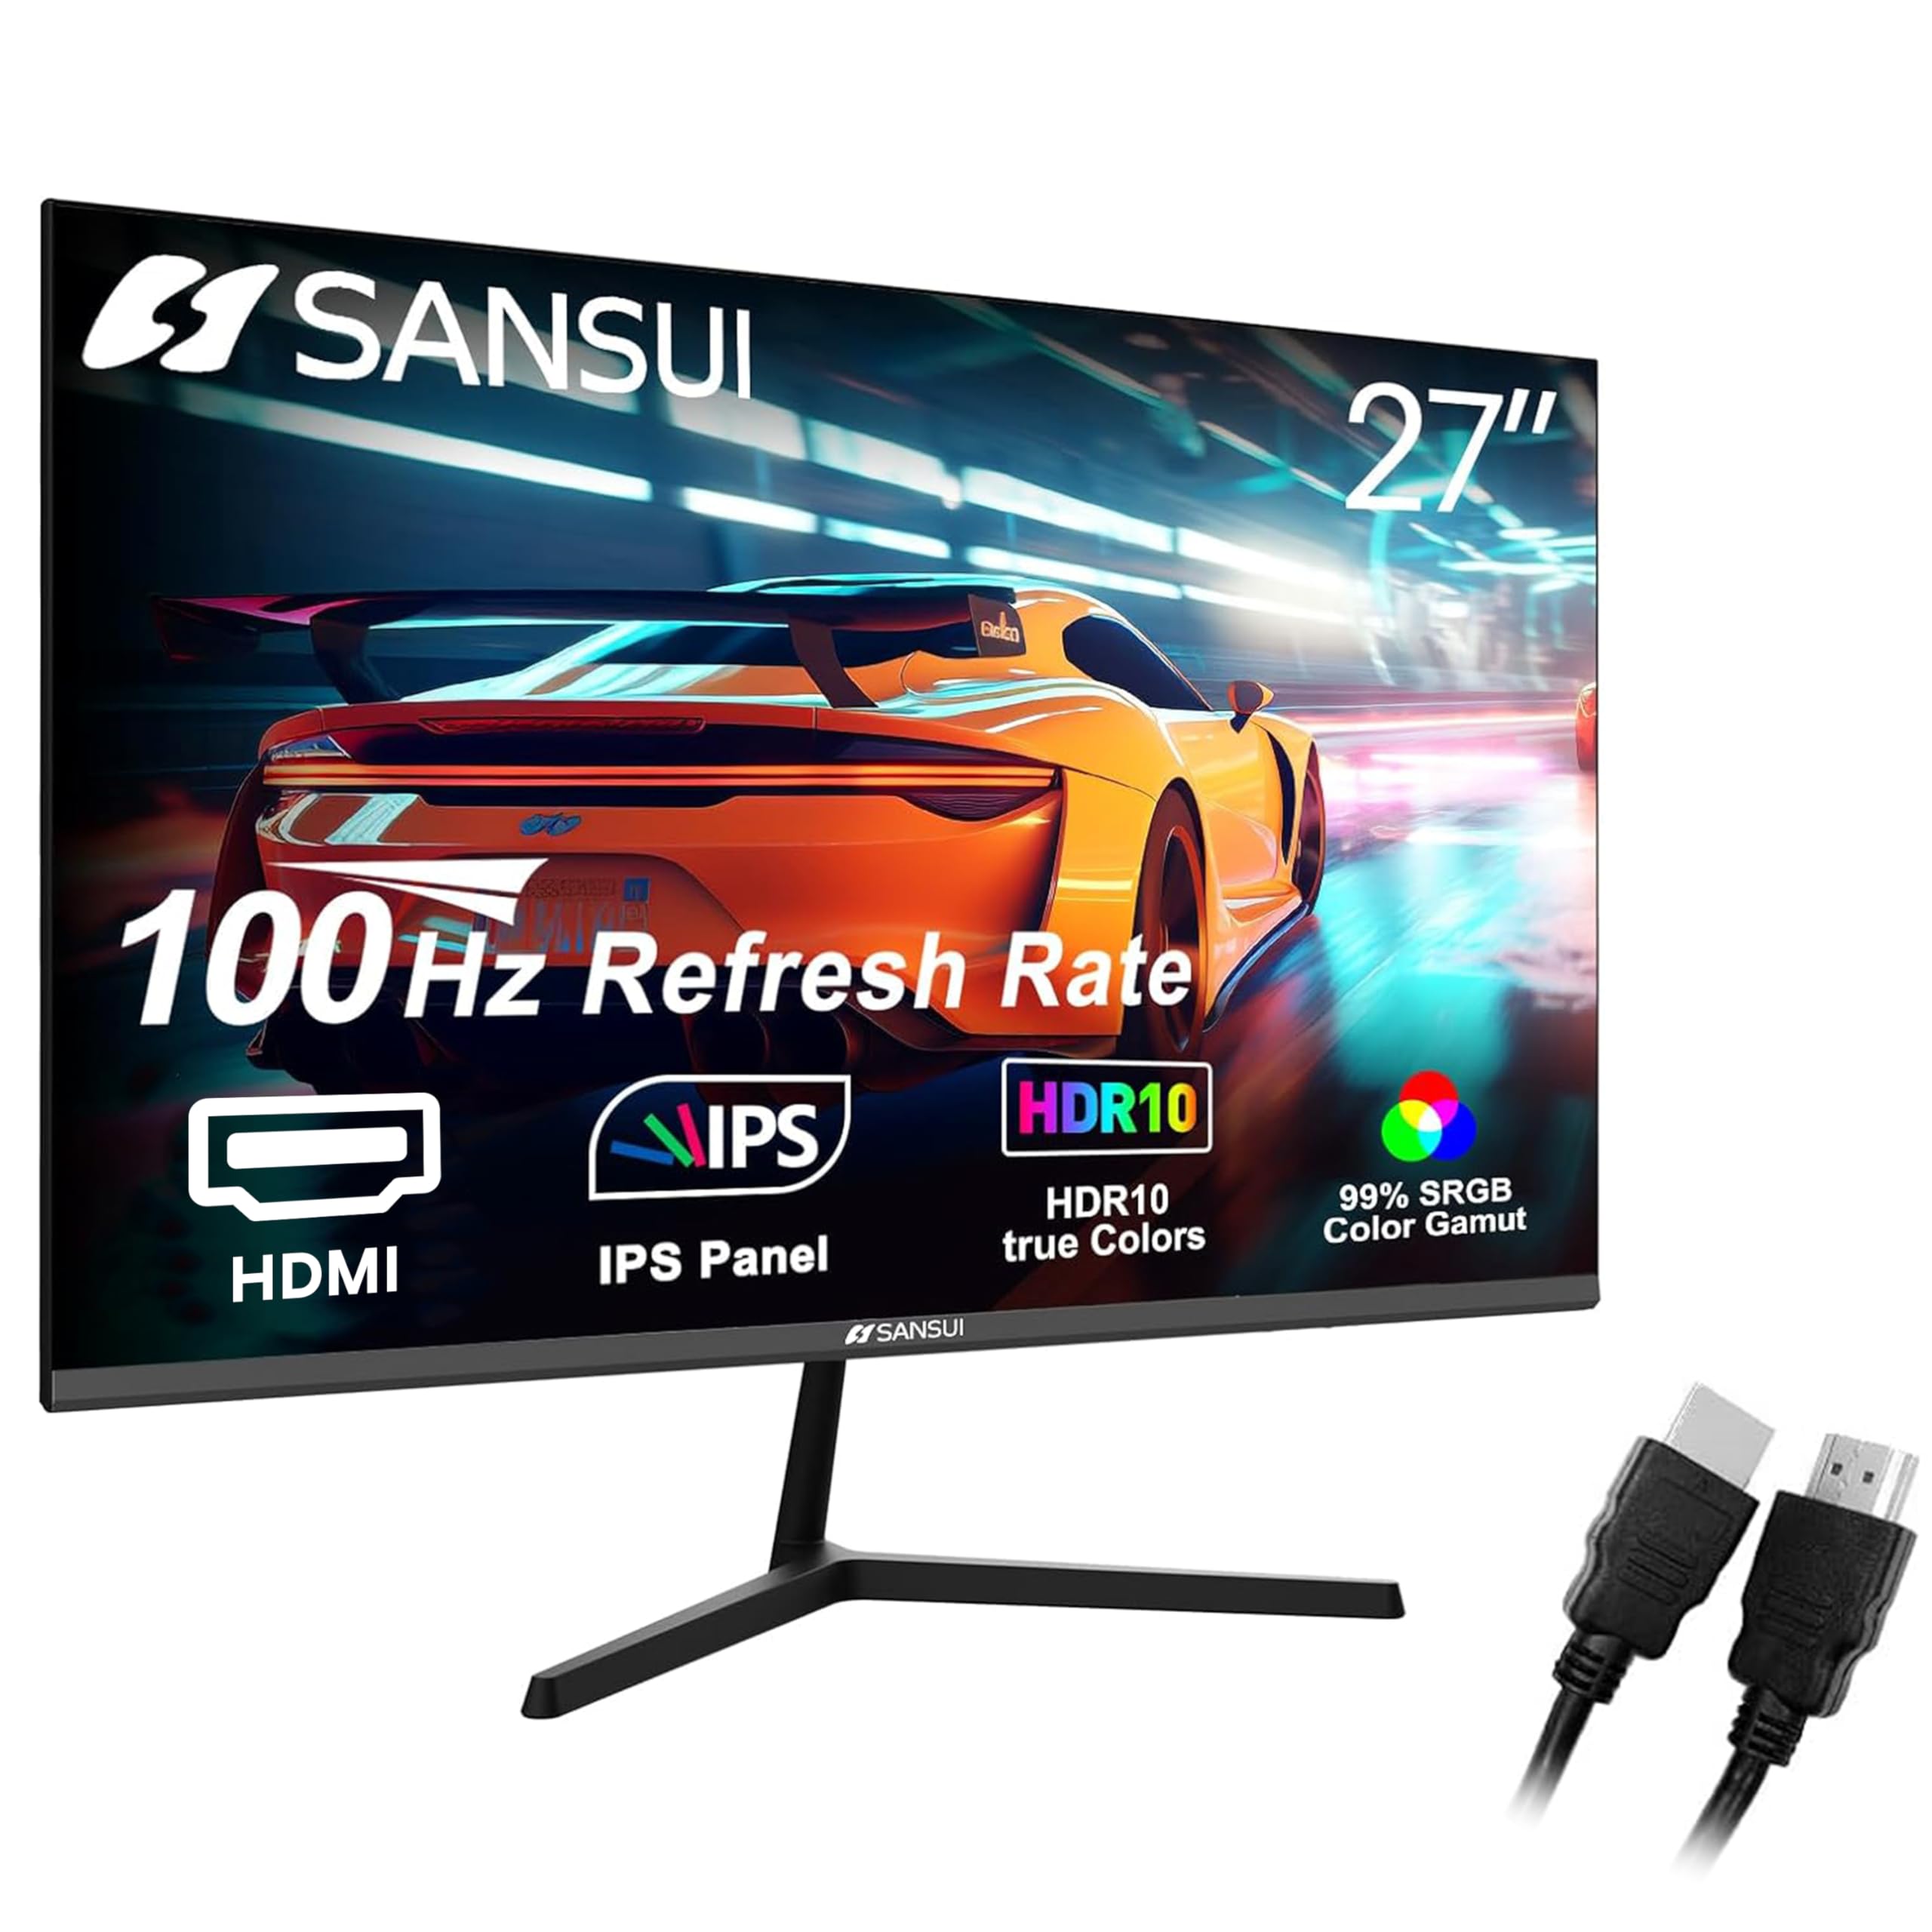 SANSUI Computer Monitors 27 inch 100Hz IPS FHD 1080P HDR10 Built-in Speakers HDMI VGA Ports Game RTS/FPS tilt Adjustable for Working and Gaming (ES-27X3L HDMI Cable Included)